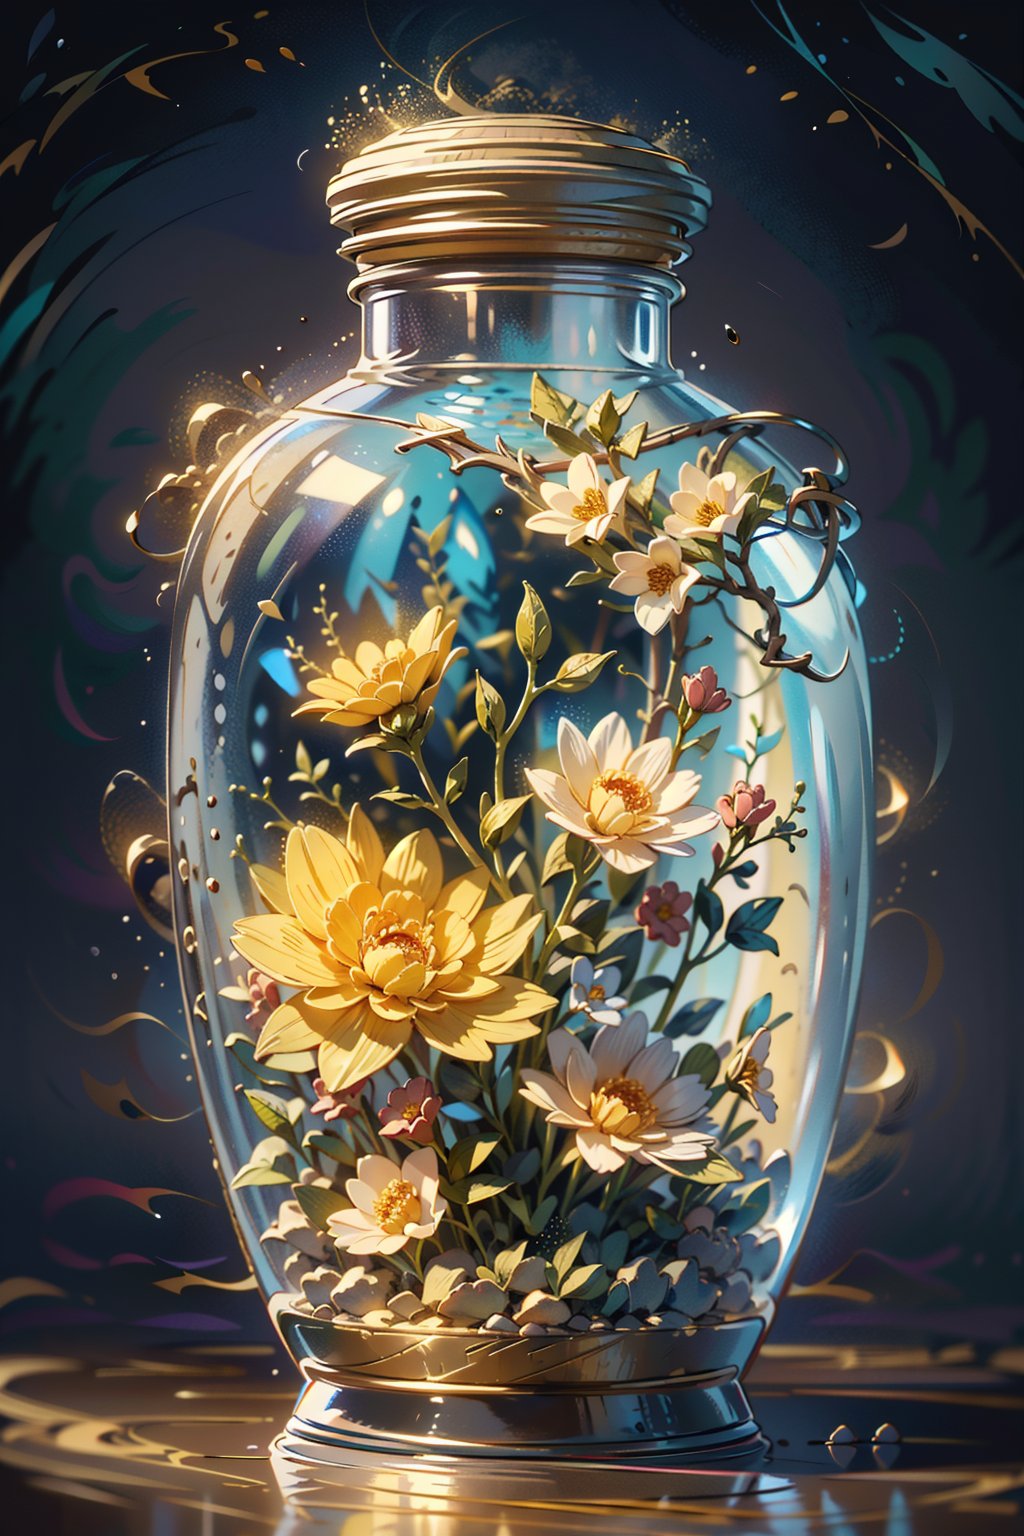 Highres, best quality, extremely detailed, area lighting in background, HD, 8k, extremely intricate:1.3), 1 girl, realistic, SMALL BODY, CUTE, GlowingRunes_yellow, stomach, elf, fairies, phgls, in container, Transparent colorless vaze, flowers, colorful background, flowers, warm colors, soft colors, impressionistic, abstract, 